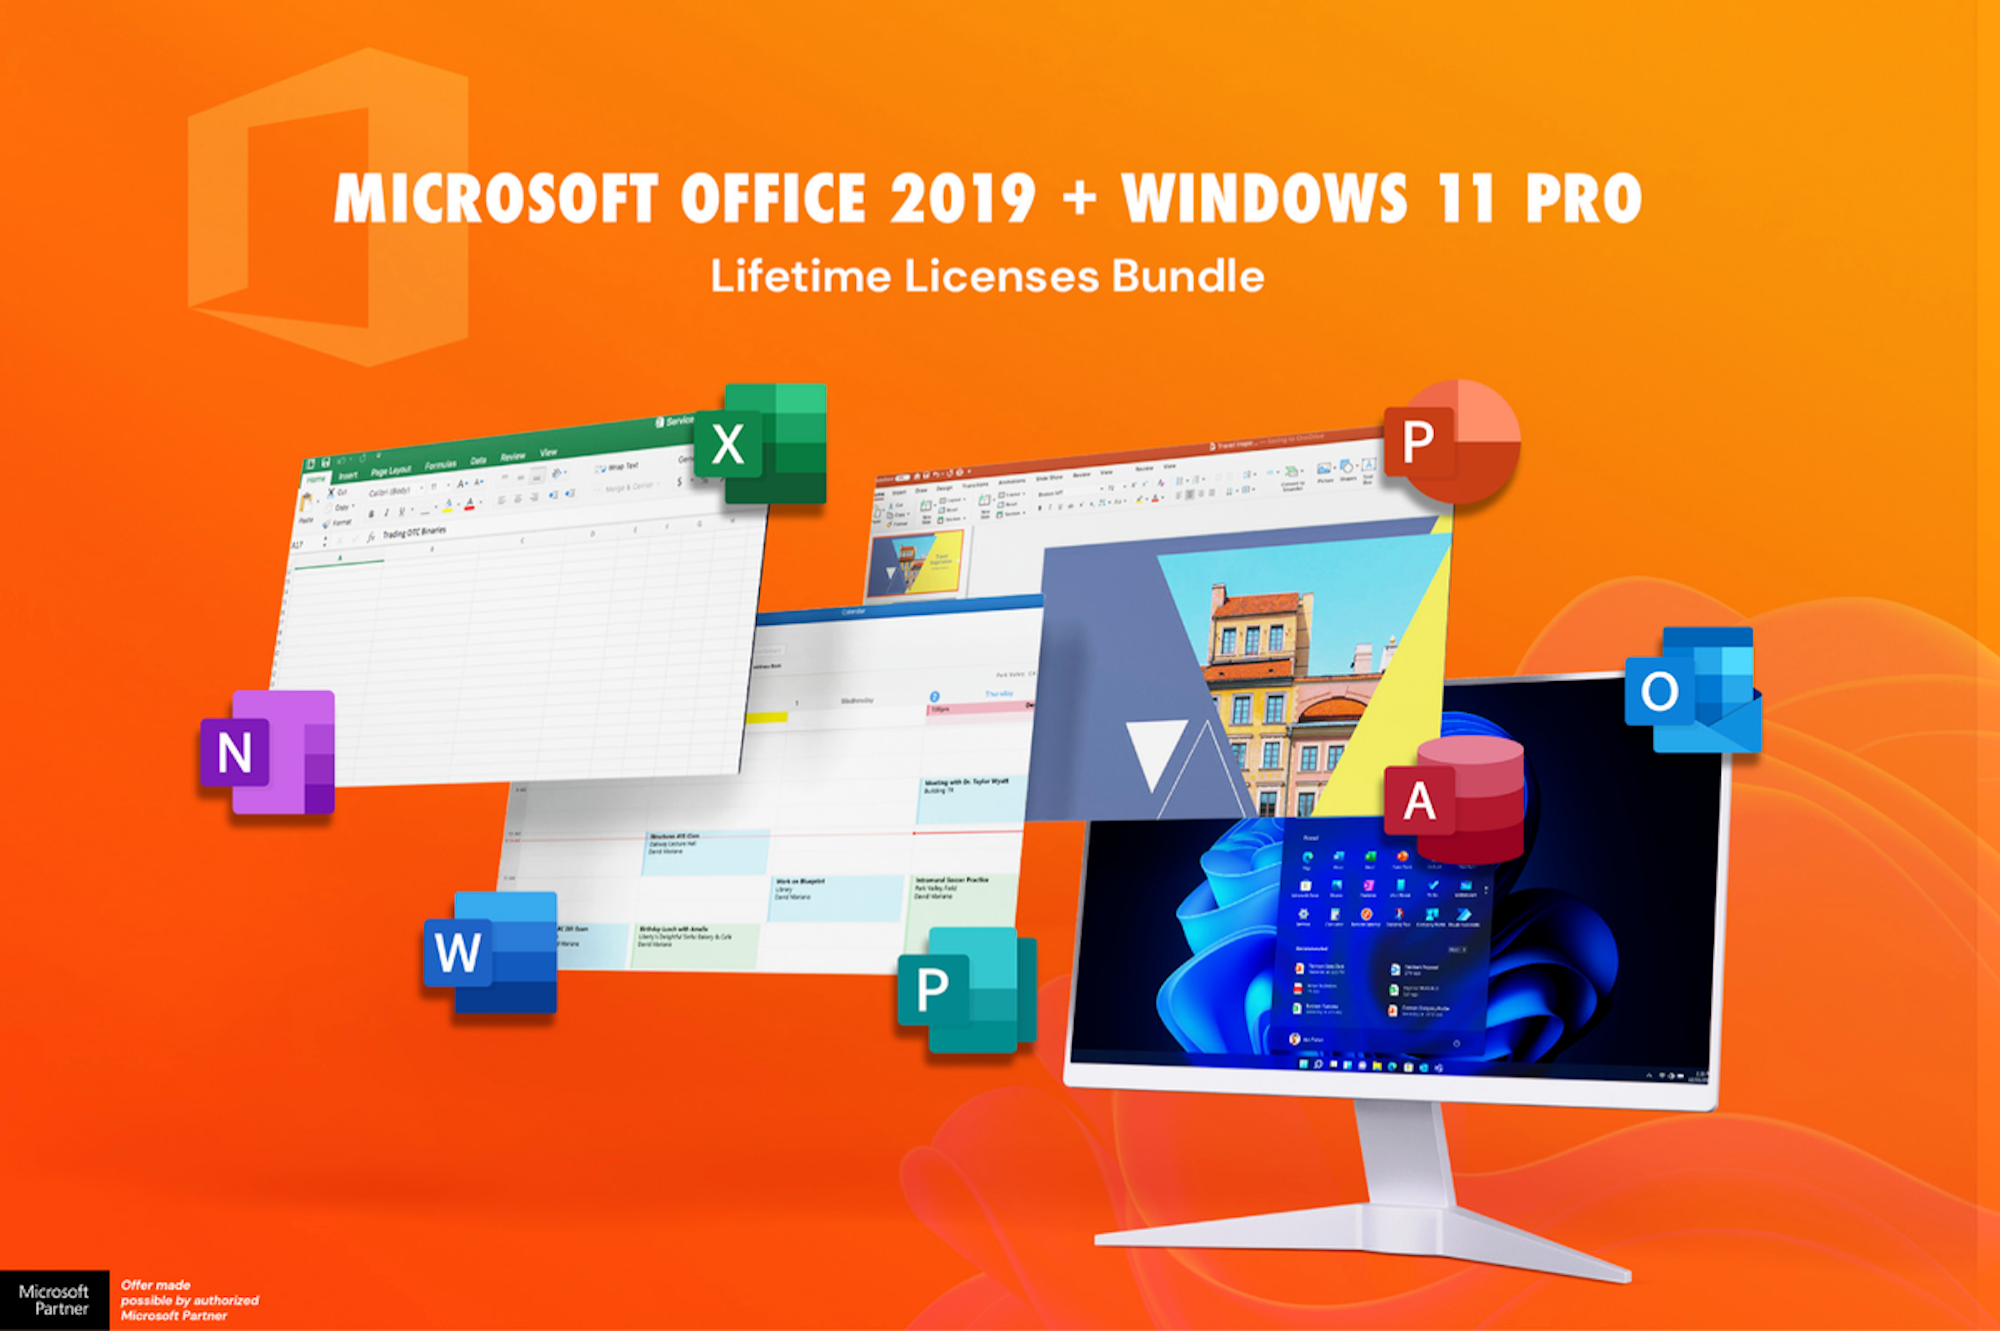 Save on Setting up Your Computer — Microsoft Office is $50